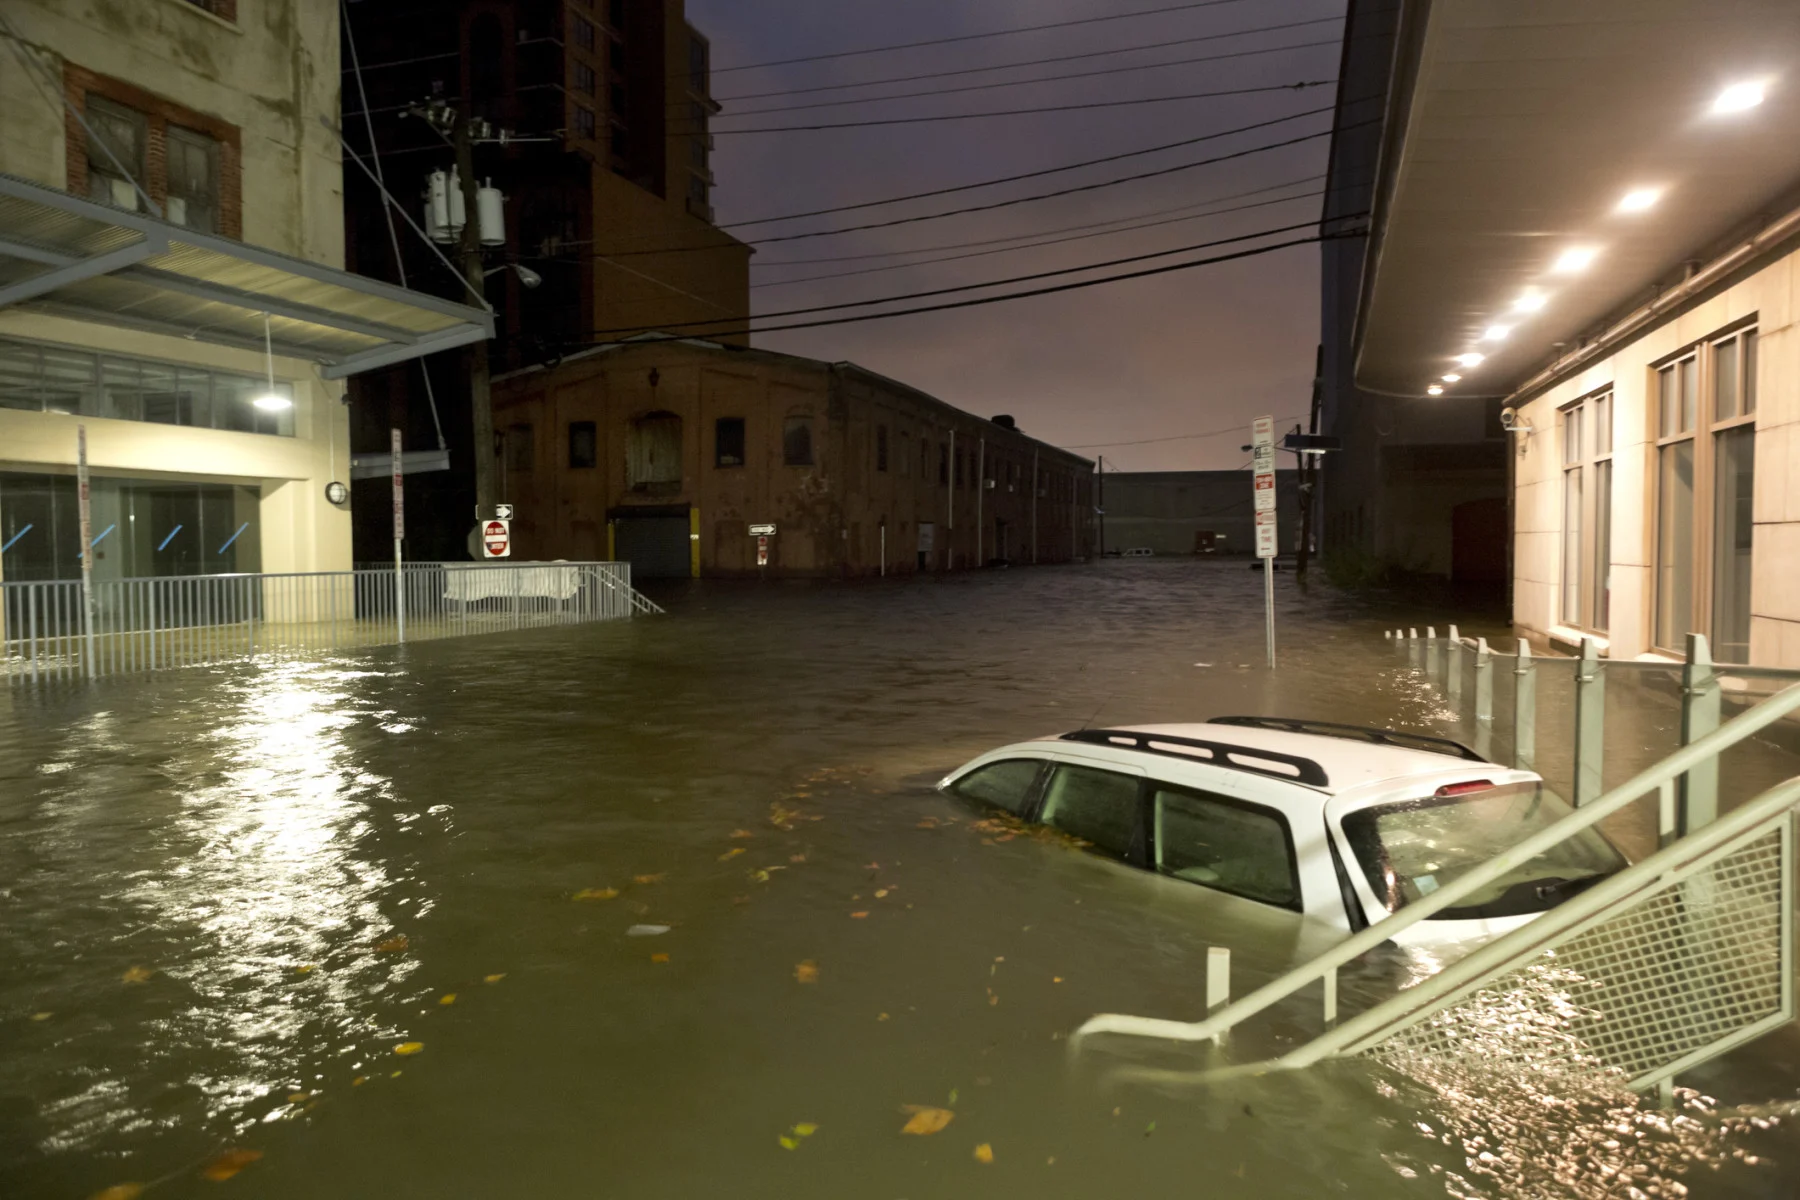 flooding in jersey city, new jersey with a car submerged (Byba Sepit/ DigitalVision/ Getty Images)